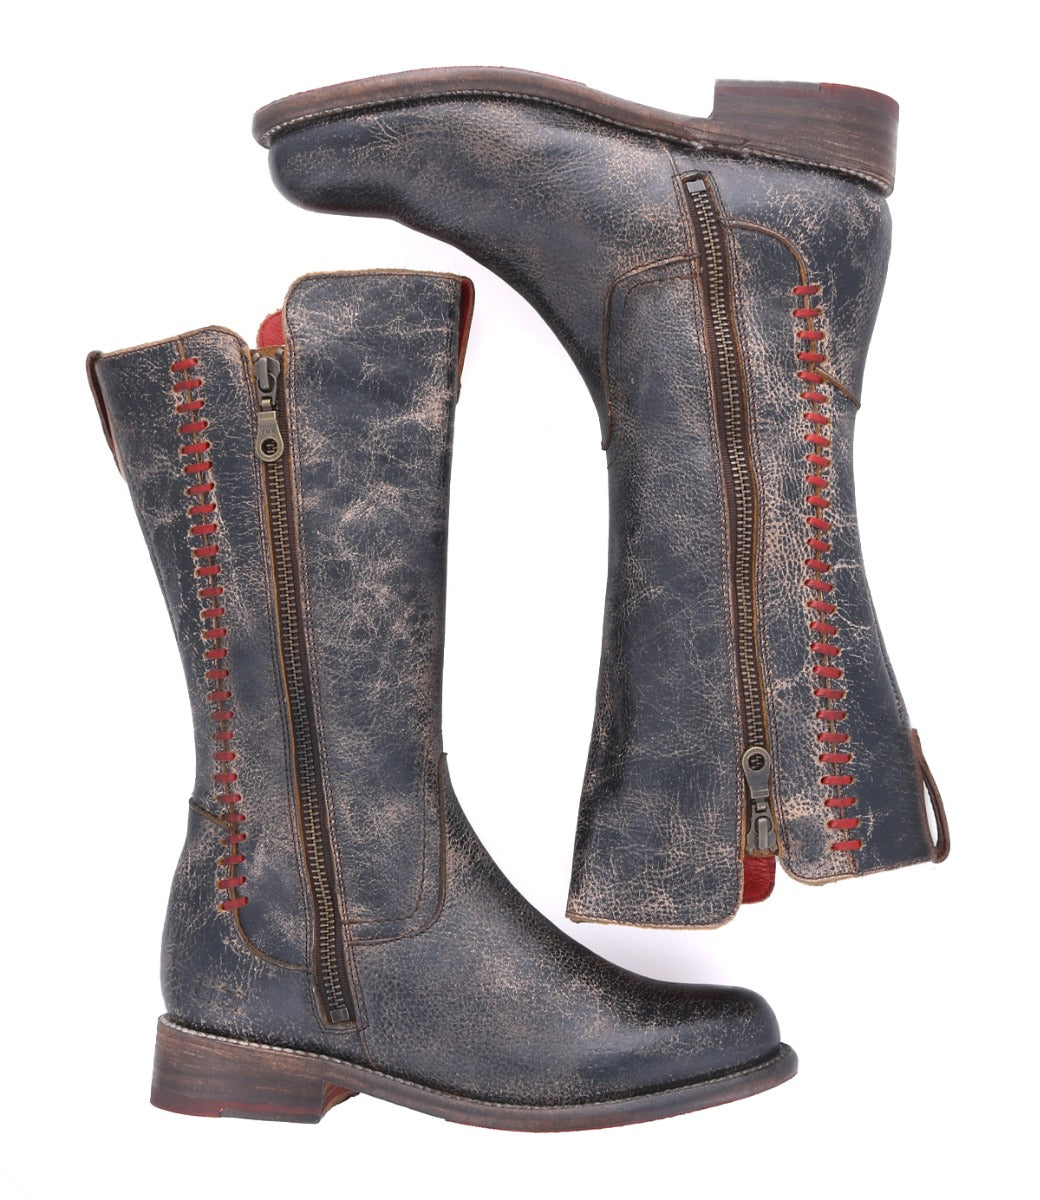 A pair of Bed Stu Latifah women's boots with zippers on the side.